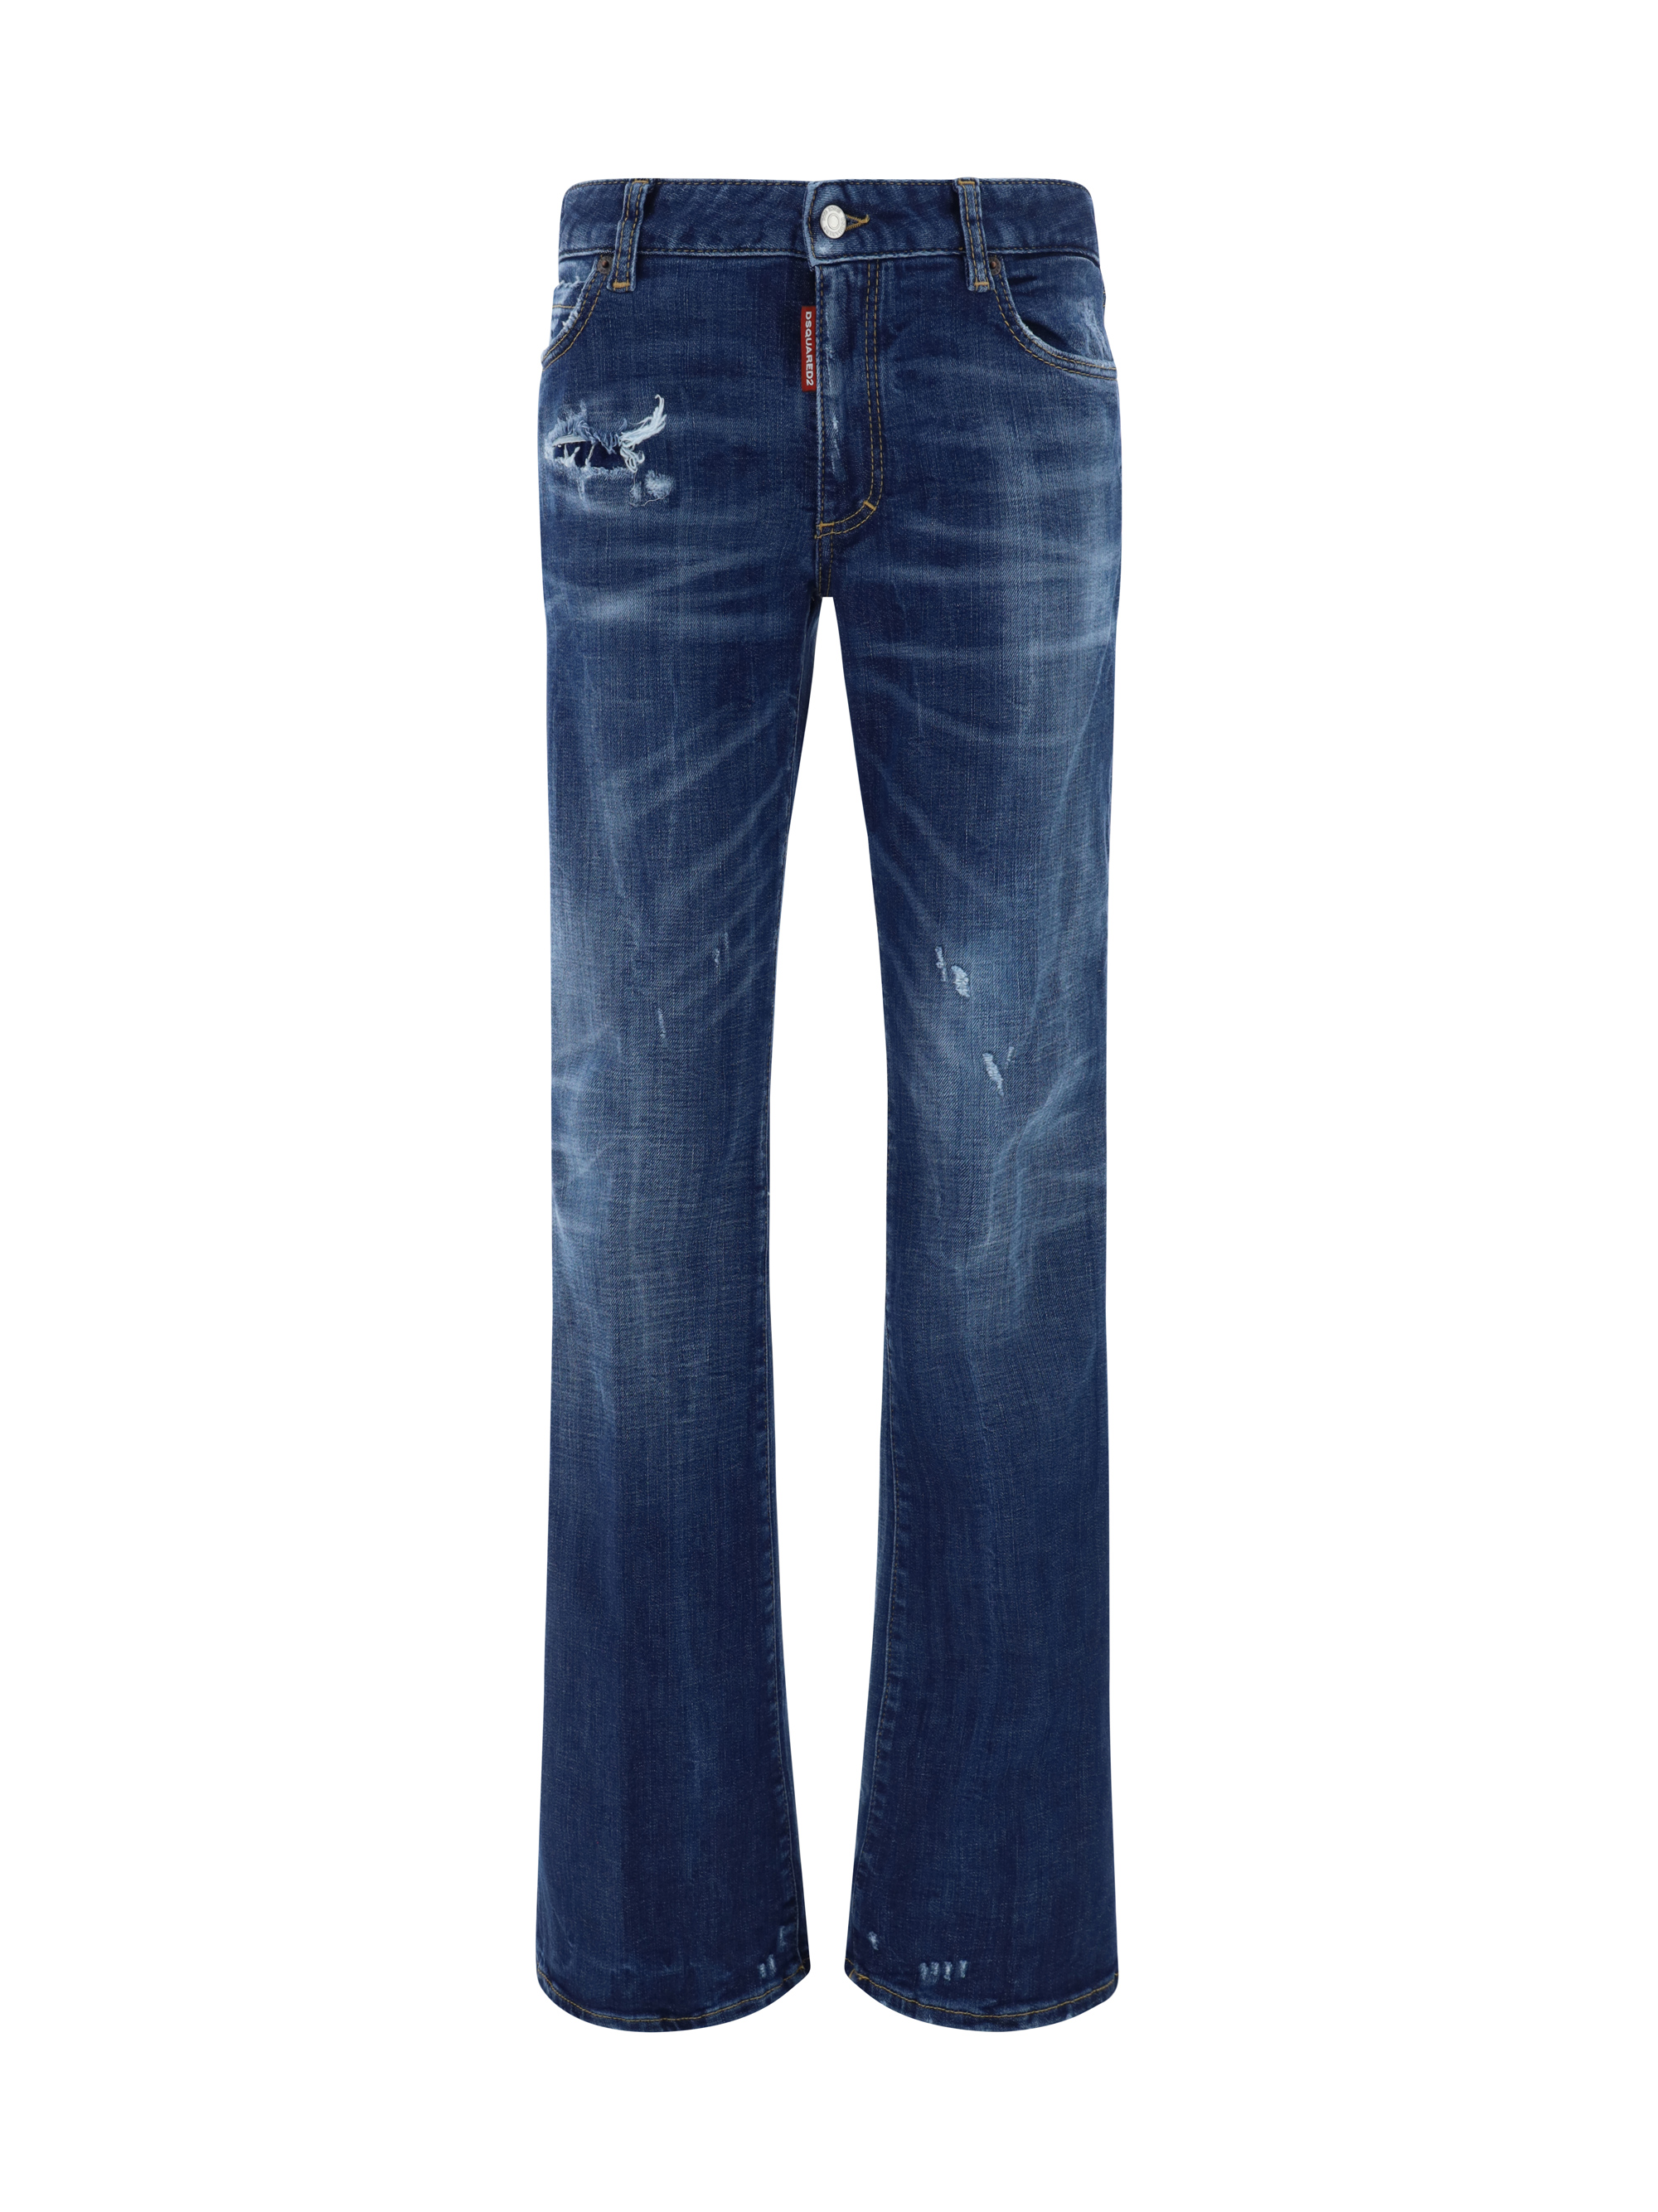 Dsquared2 Jeans In Navy Blue